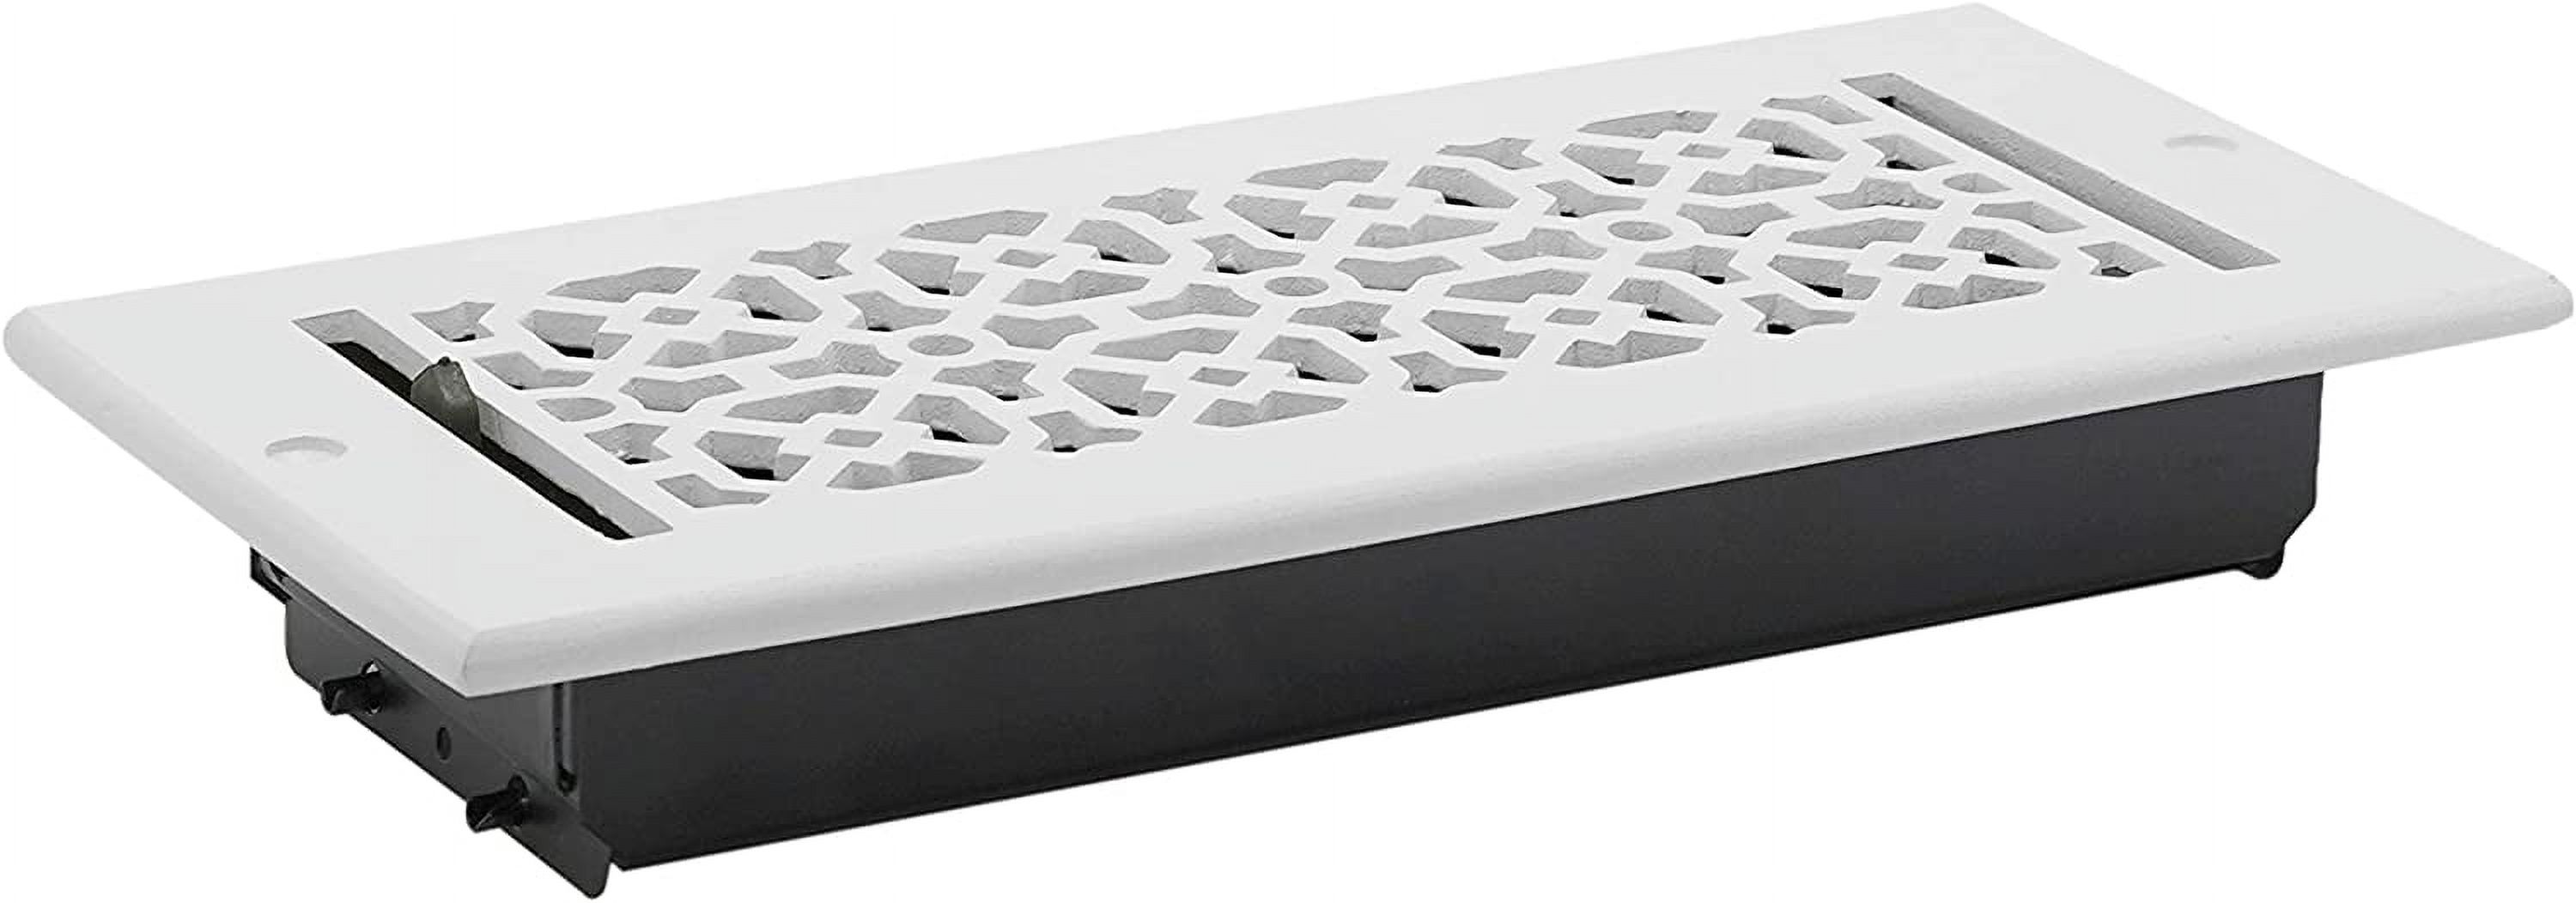 4" x 10" Duct Size (Overall 5-1/2"x 11-3/4") Heat Vent (Detachable Steel Metal Louver)| Cast Aluminum| Floor /Wall Vent Cover| Powder Coated - image 2 of 7